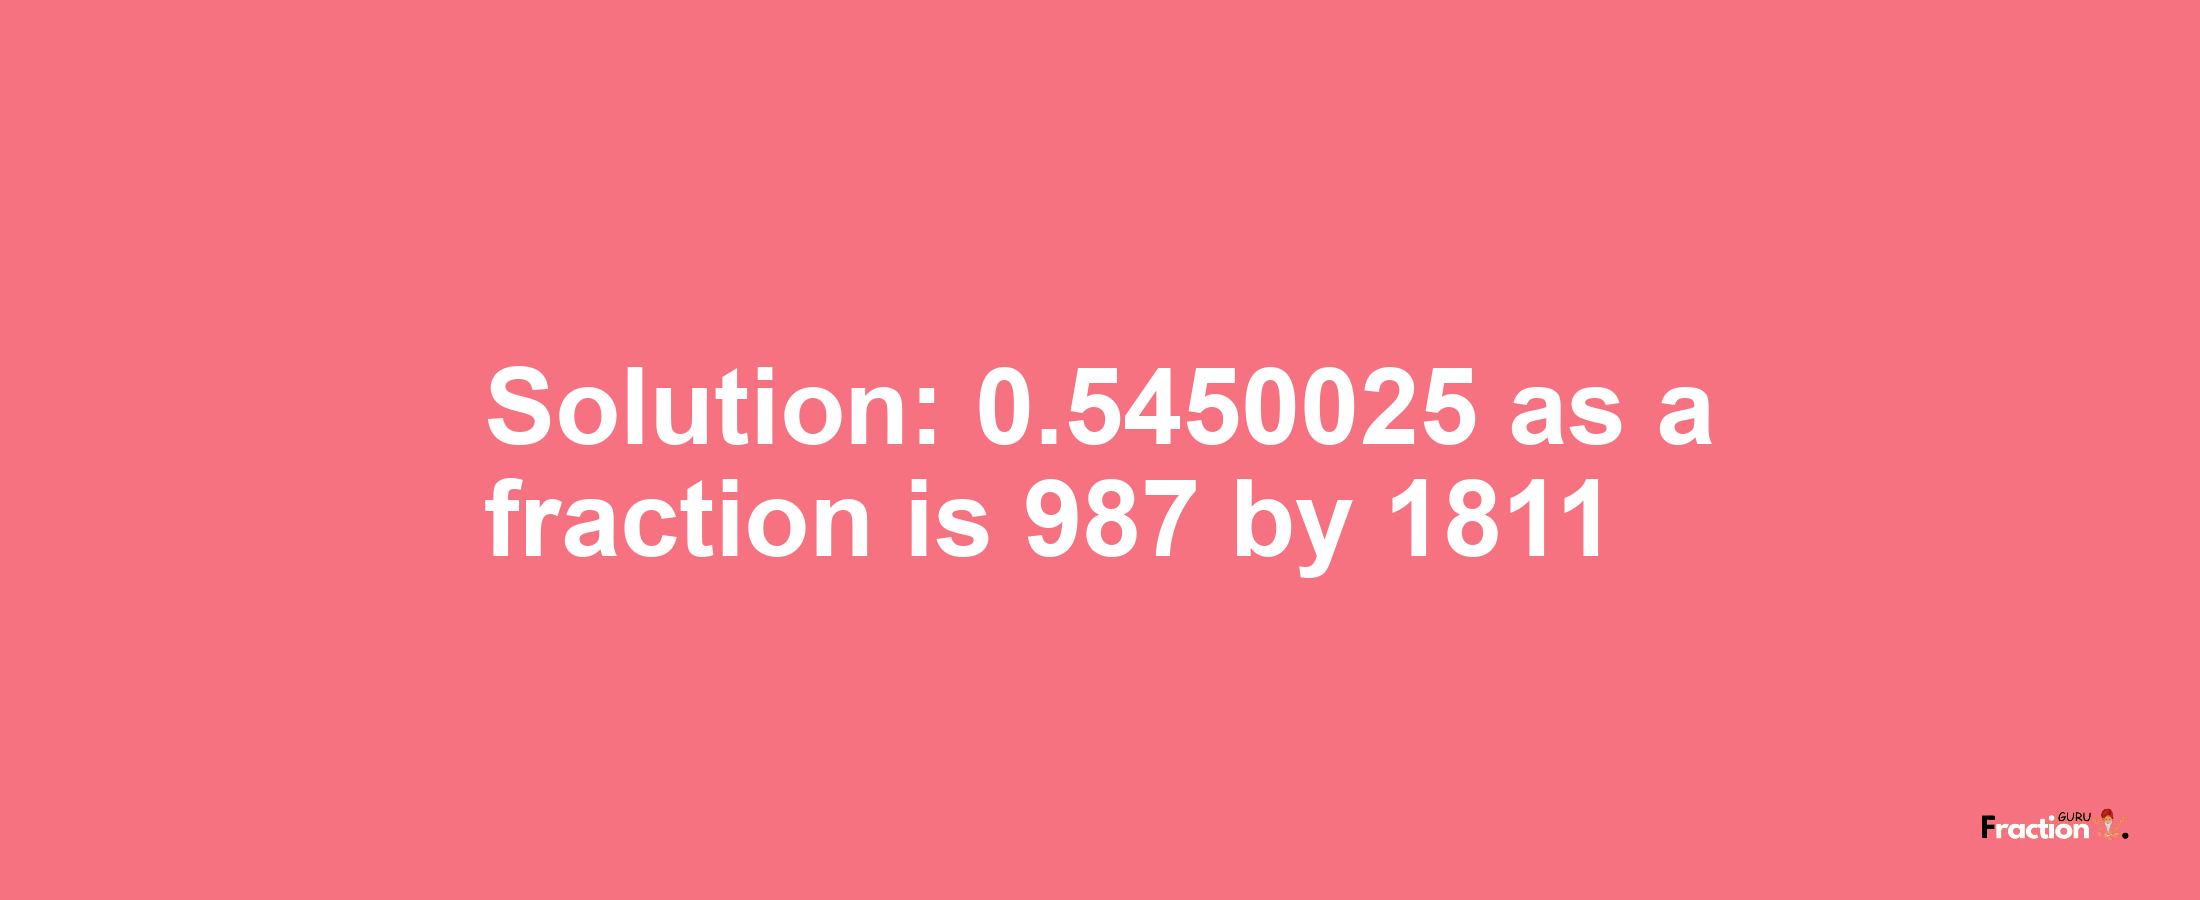 Solution:0.5450025 as a fraction is 987/1811